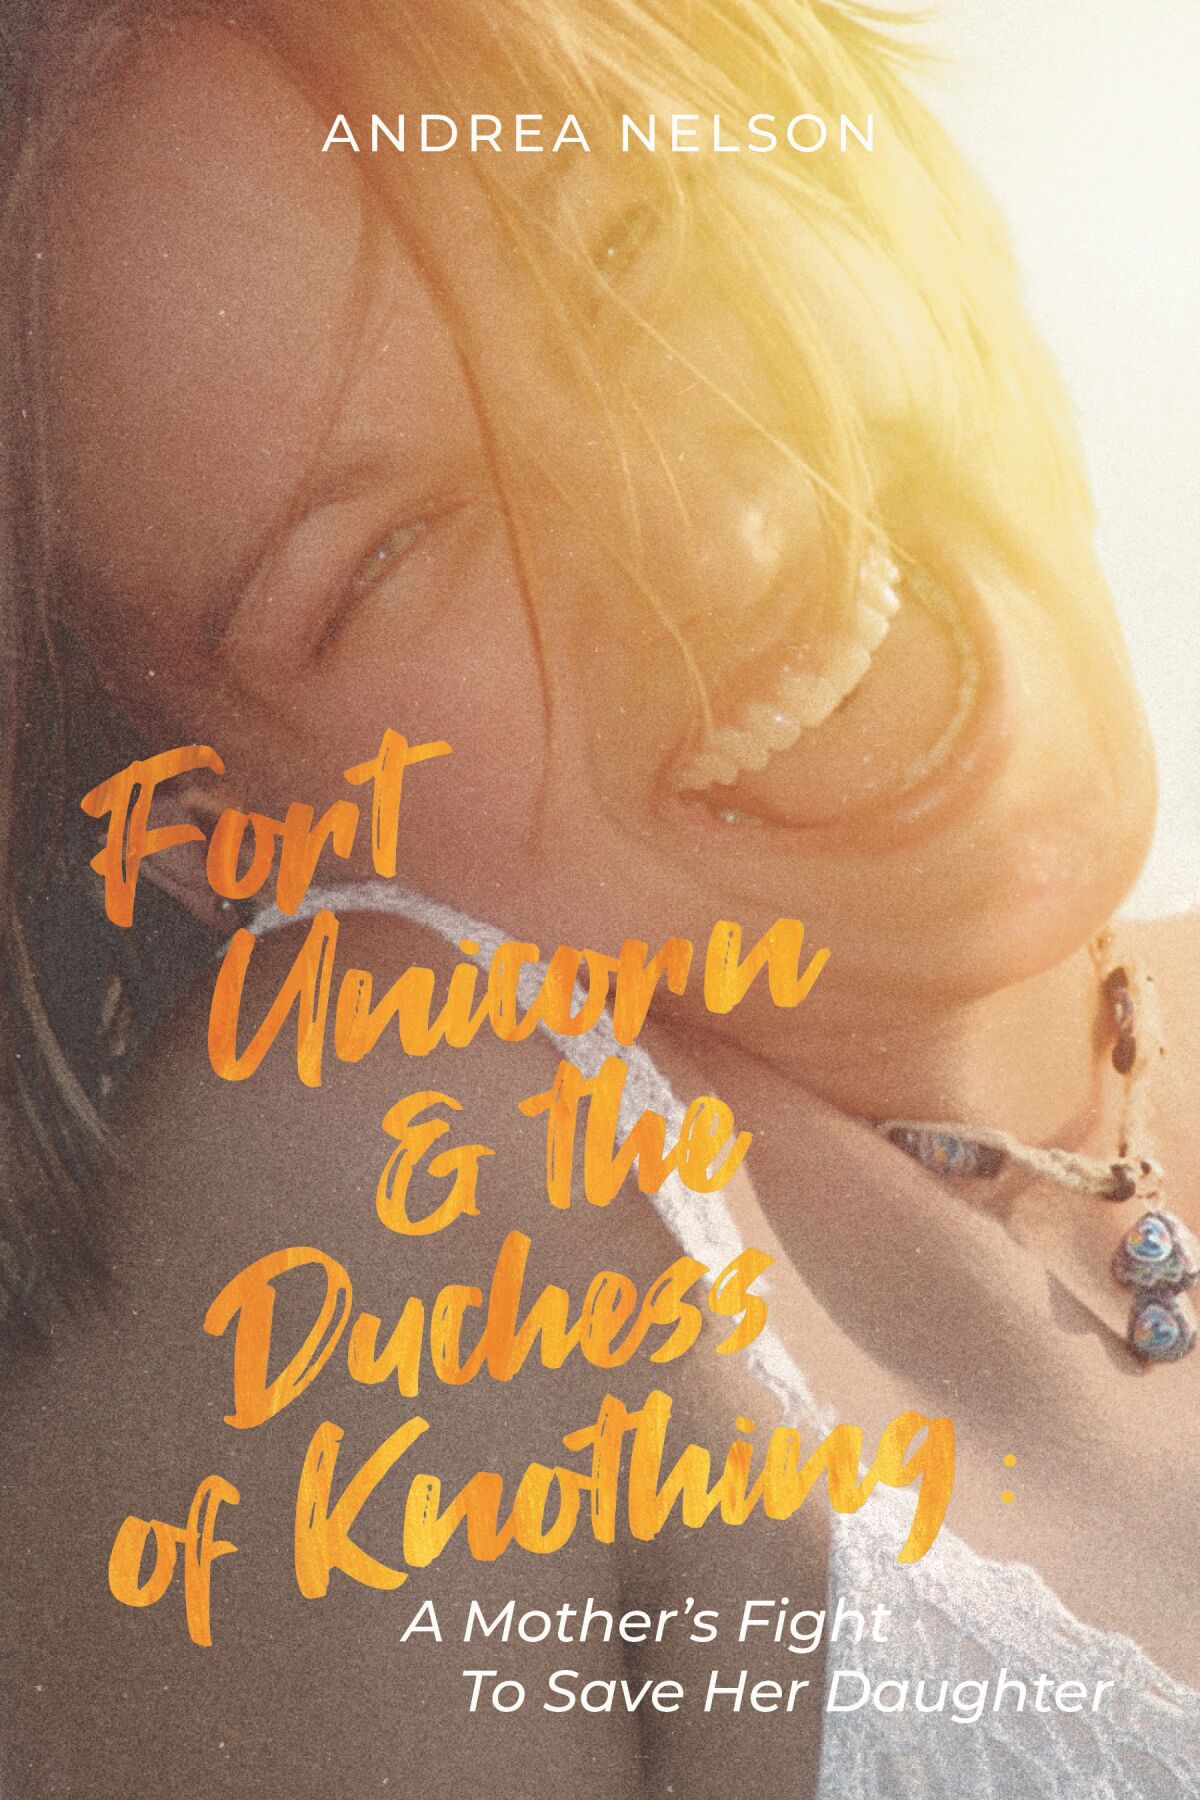 The cover of Andrea Nelson’s book, “Fort Unicorn & The Duchess of Knothing: A Mother’s Fight to Save Her Daughter.”